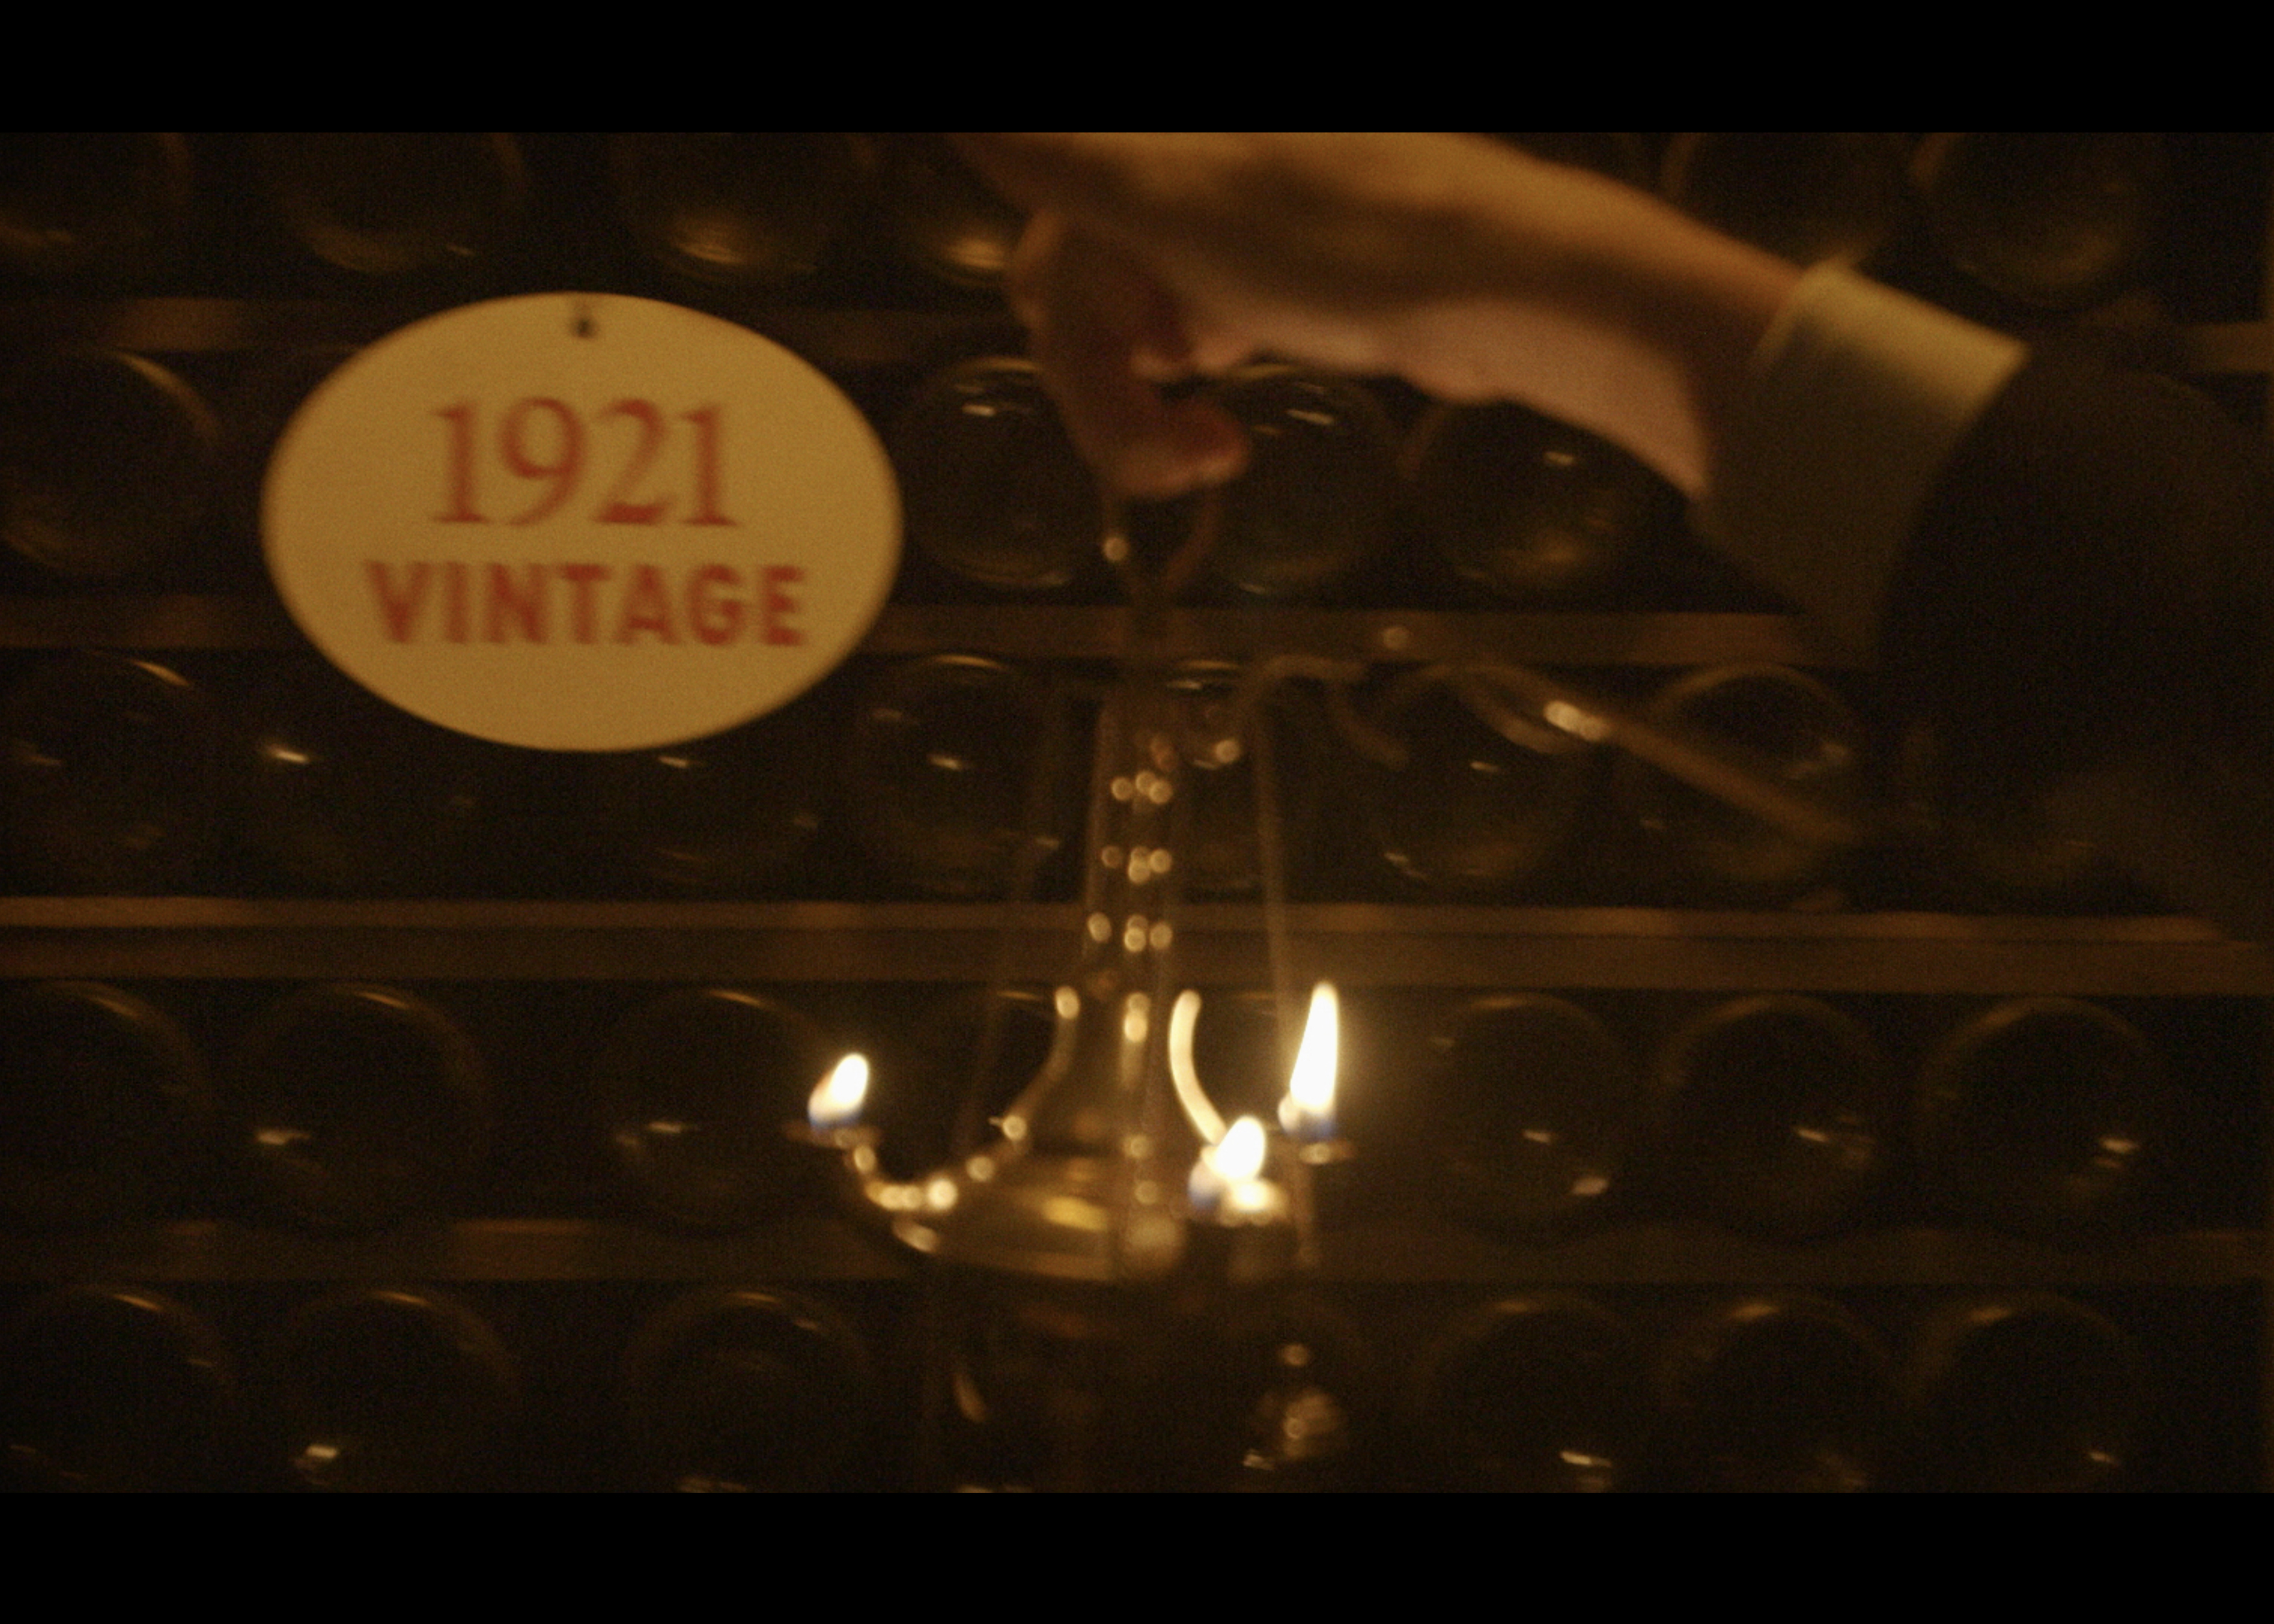 Sogrape film – “A homage to the classic Vintage”